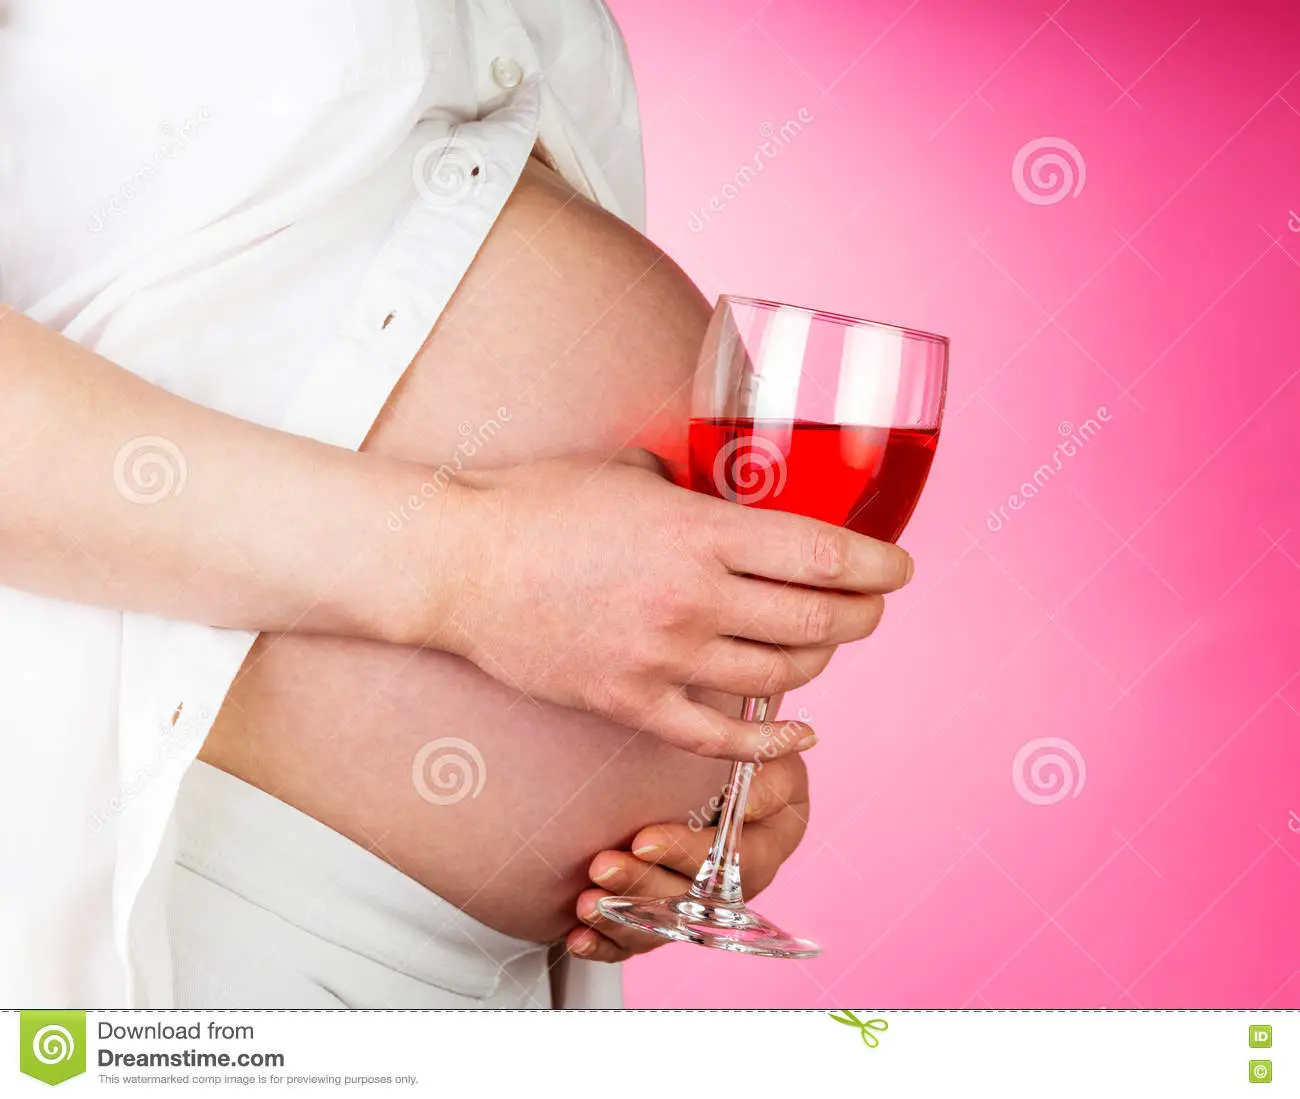 glass of wine during pregnancy  can you drink wine while pregnant  75vvvy